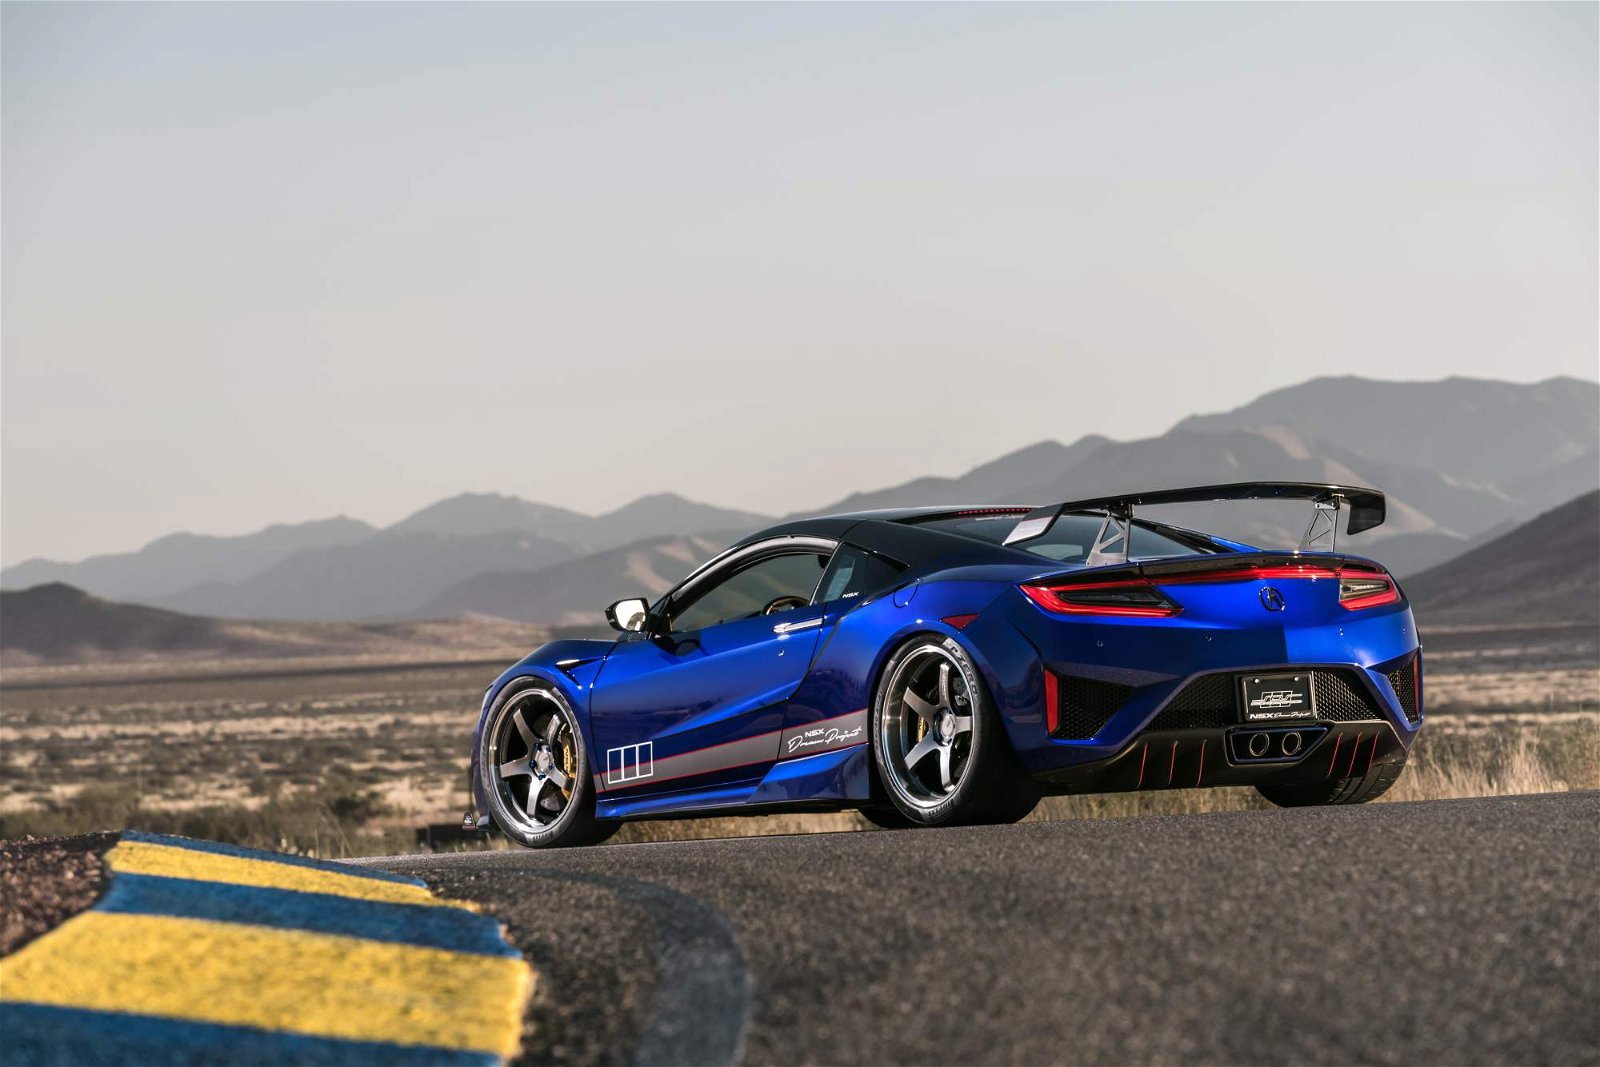 Acura-NSX-Dream-Project-by-ScienceofSpeed-2